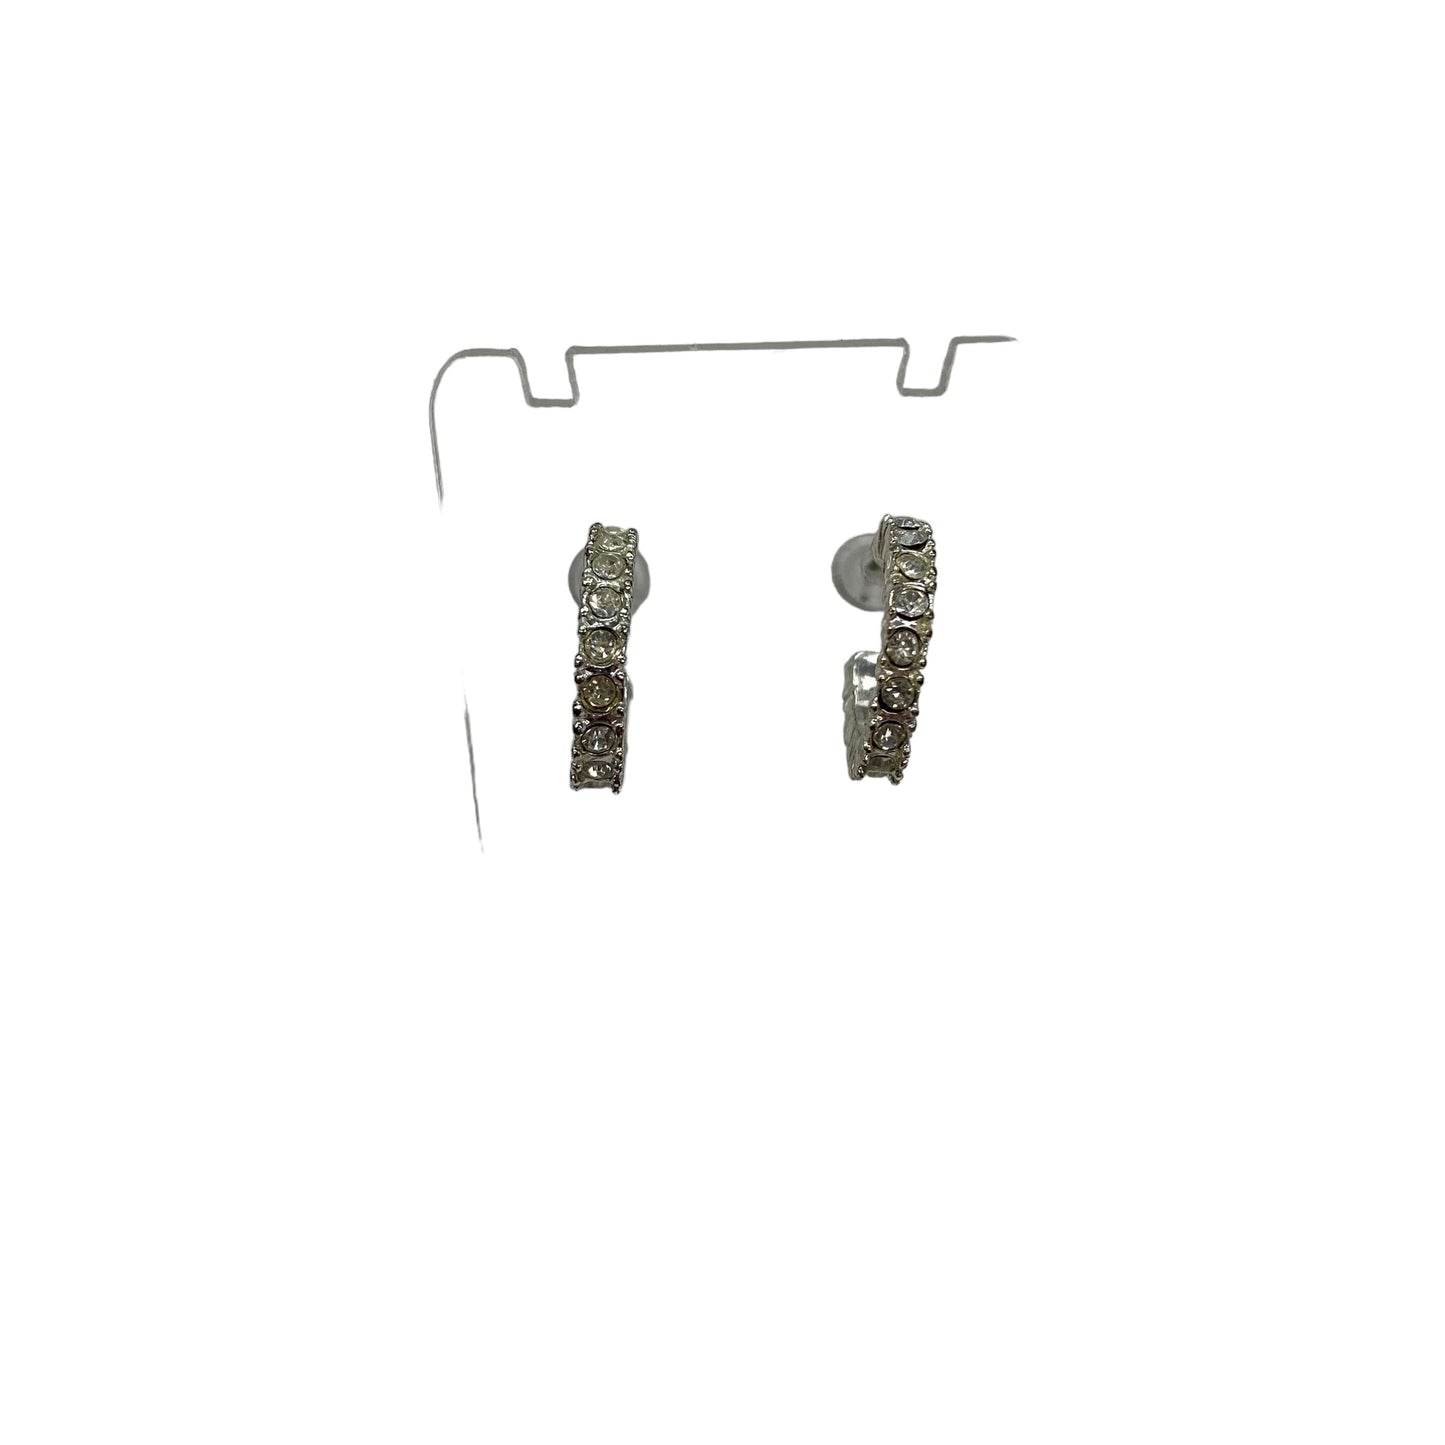 GOLD EARRINGS DANGLE/DROP by CLOTHES MENTOR